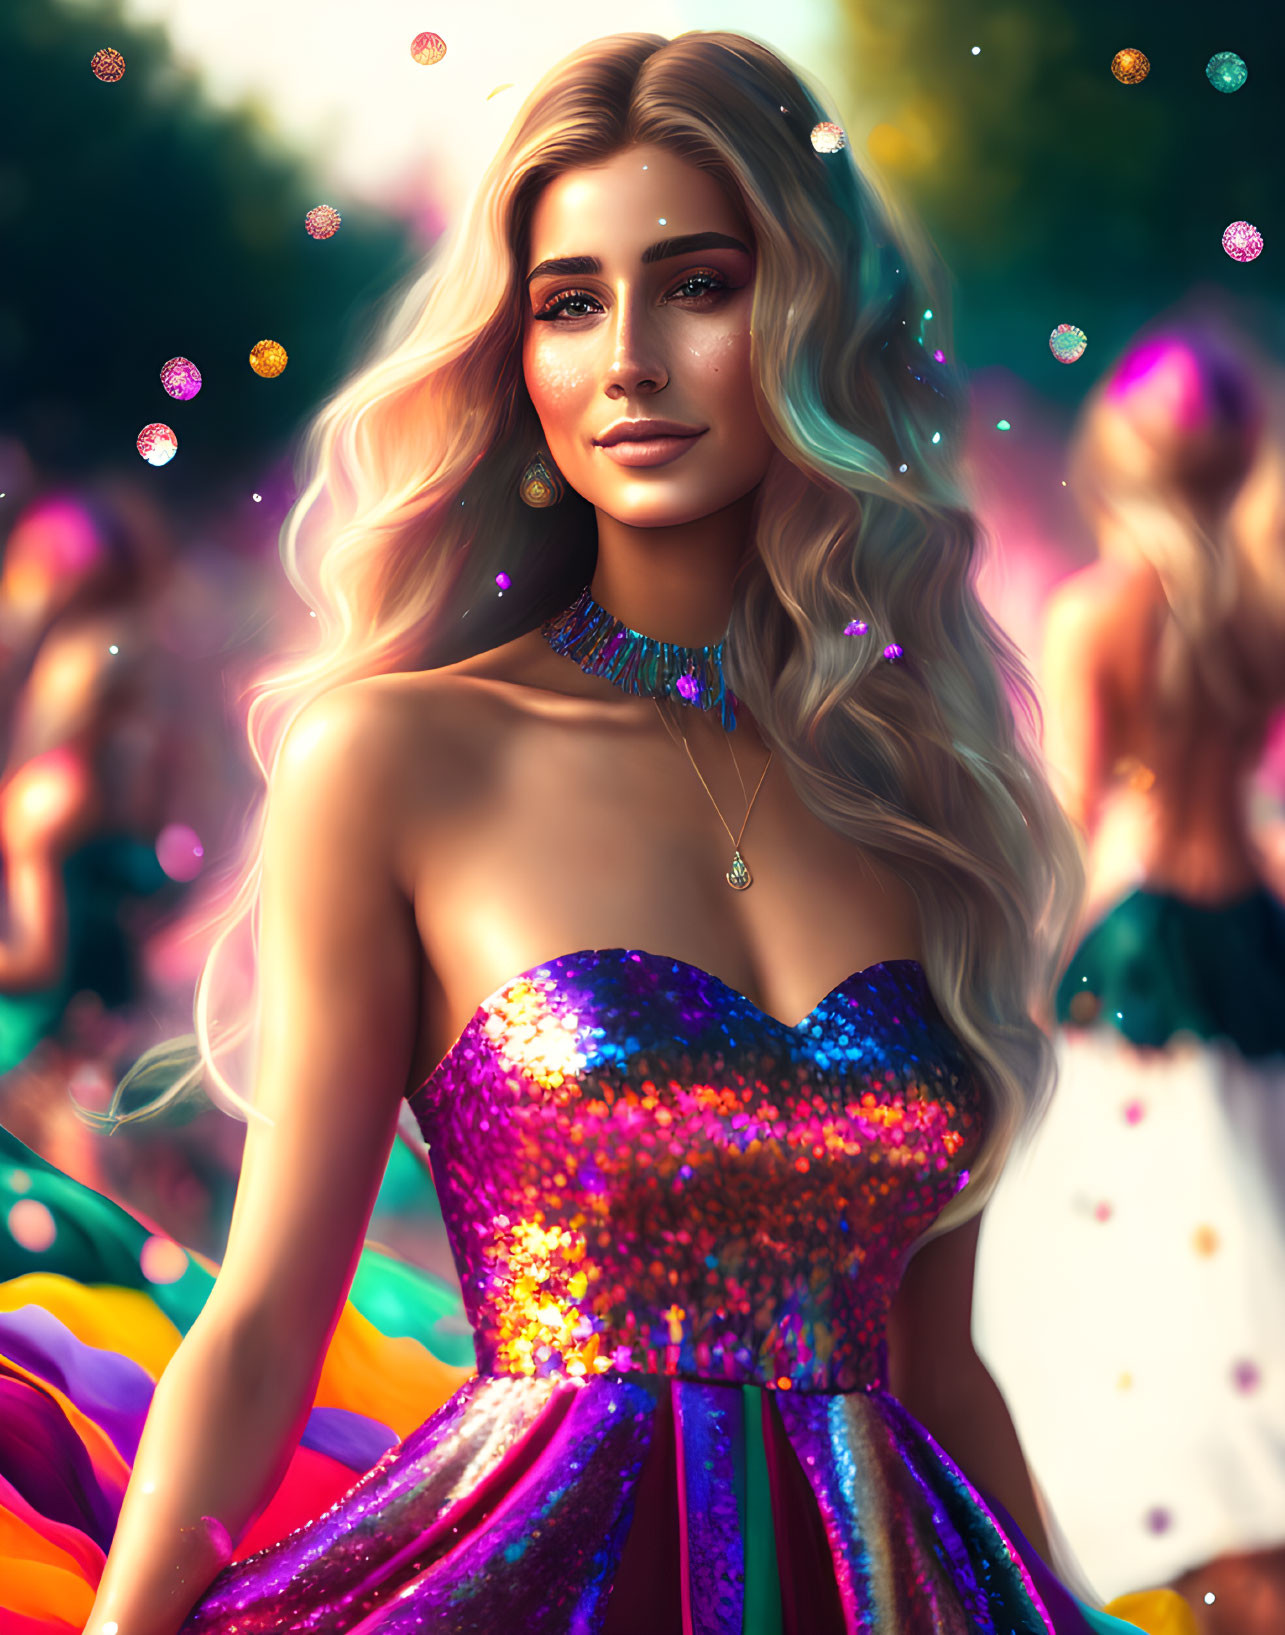 Blonde woman in purple dress with colorful necklace in festive setting